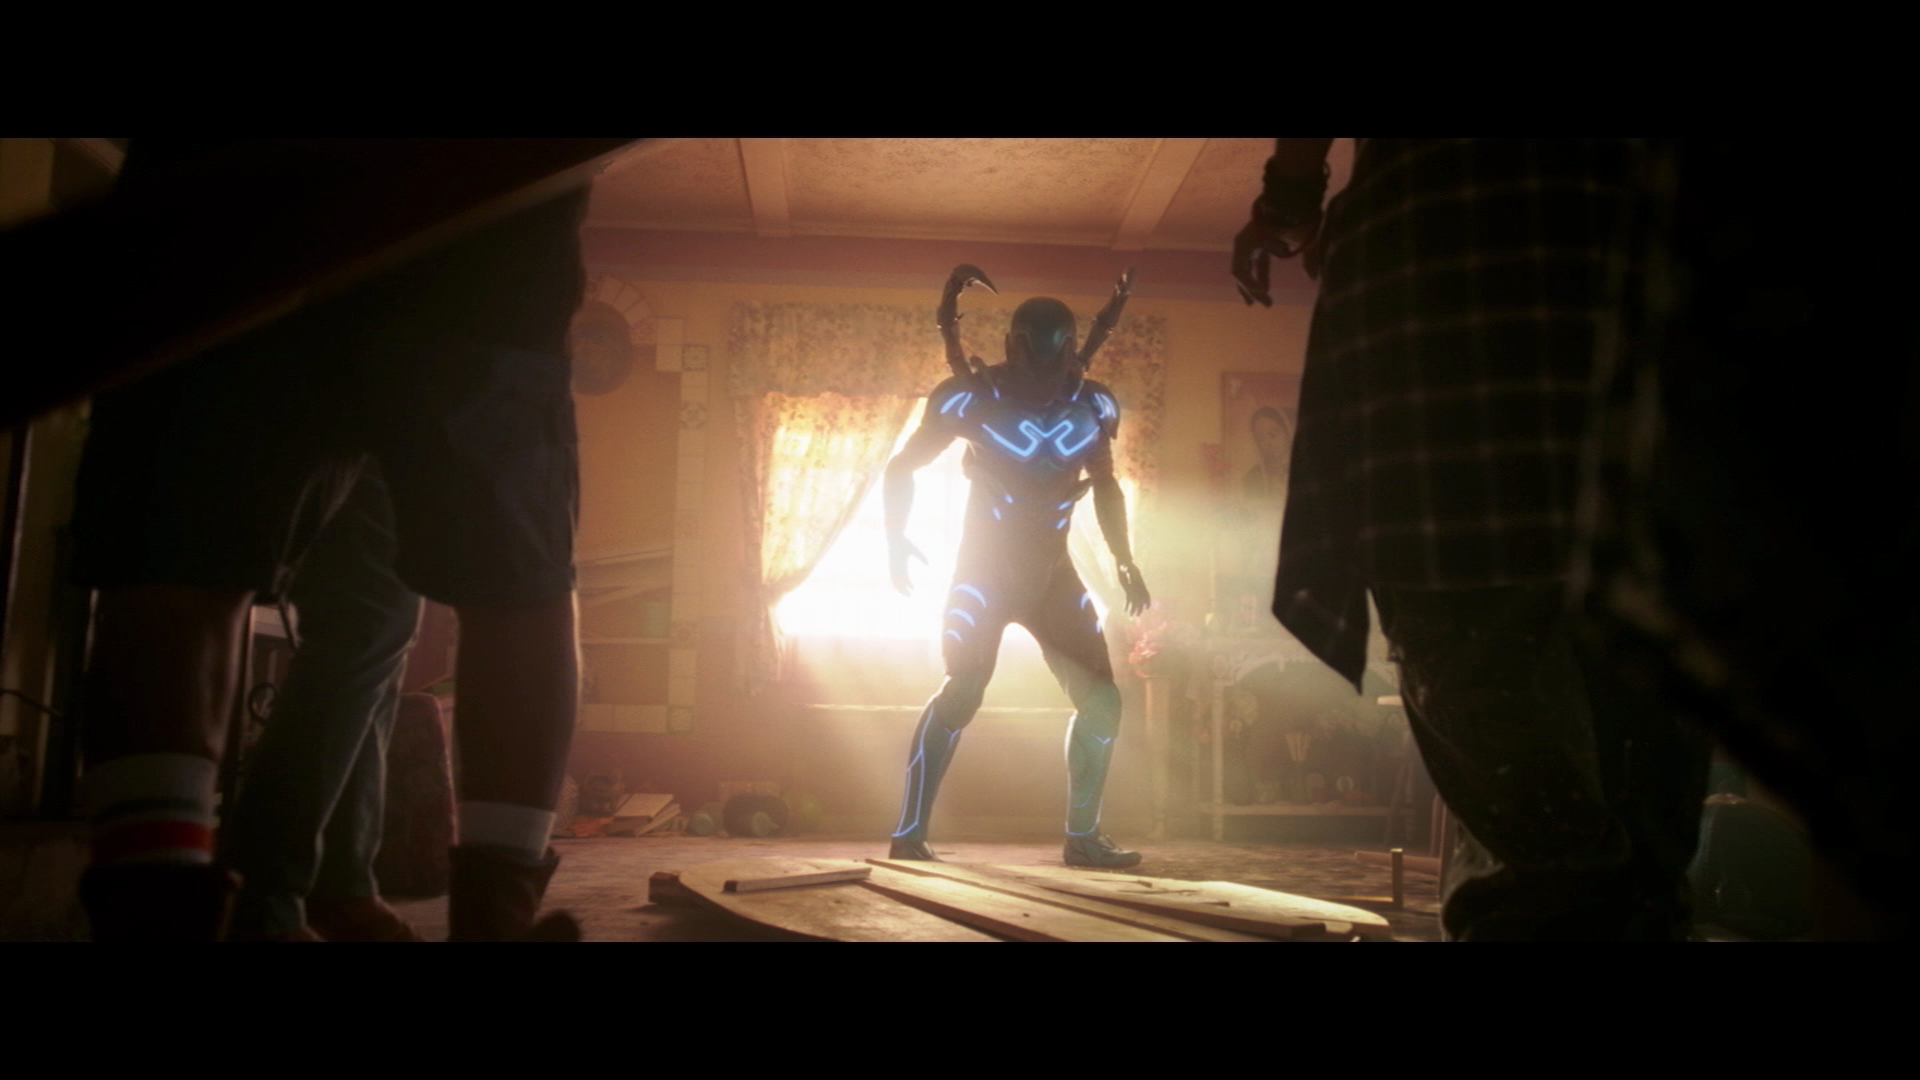 Blue Beetle' Director Confirms Film Is in the DC Universe – The Hollywood  Reporter